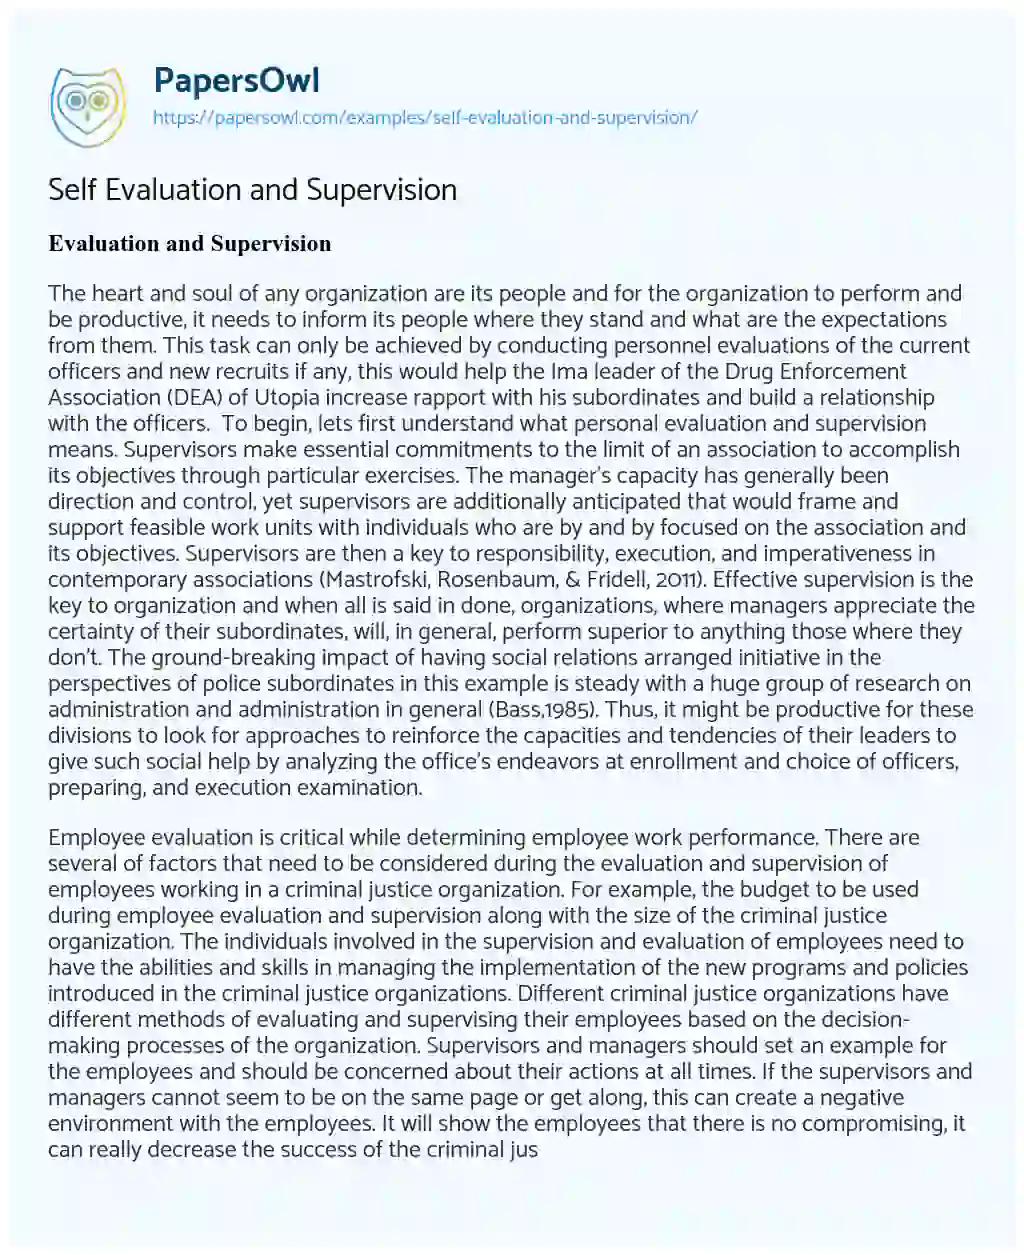 Essay on Self Evaluation and Supervision